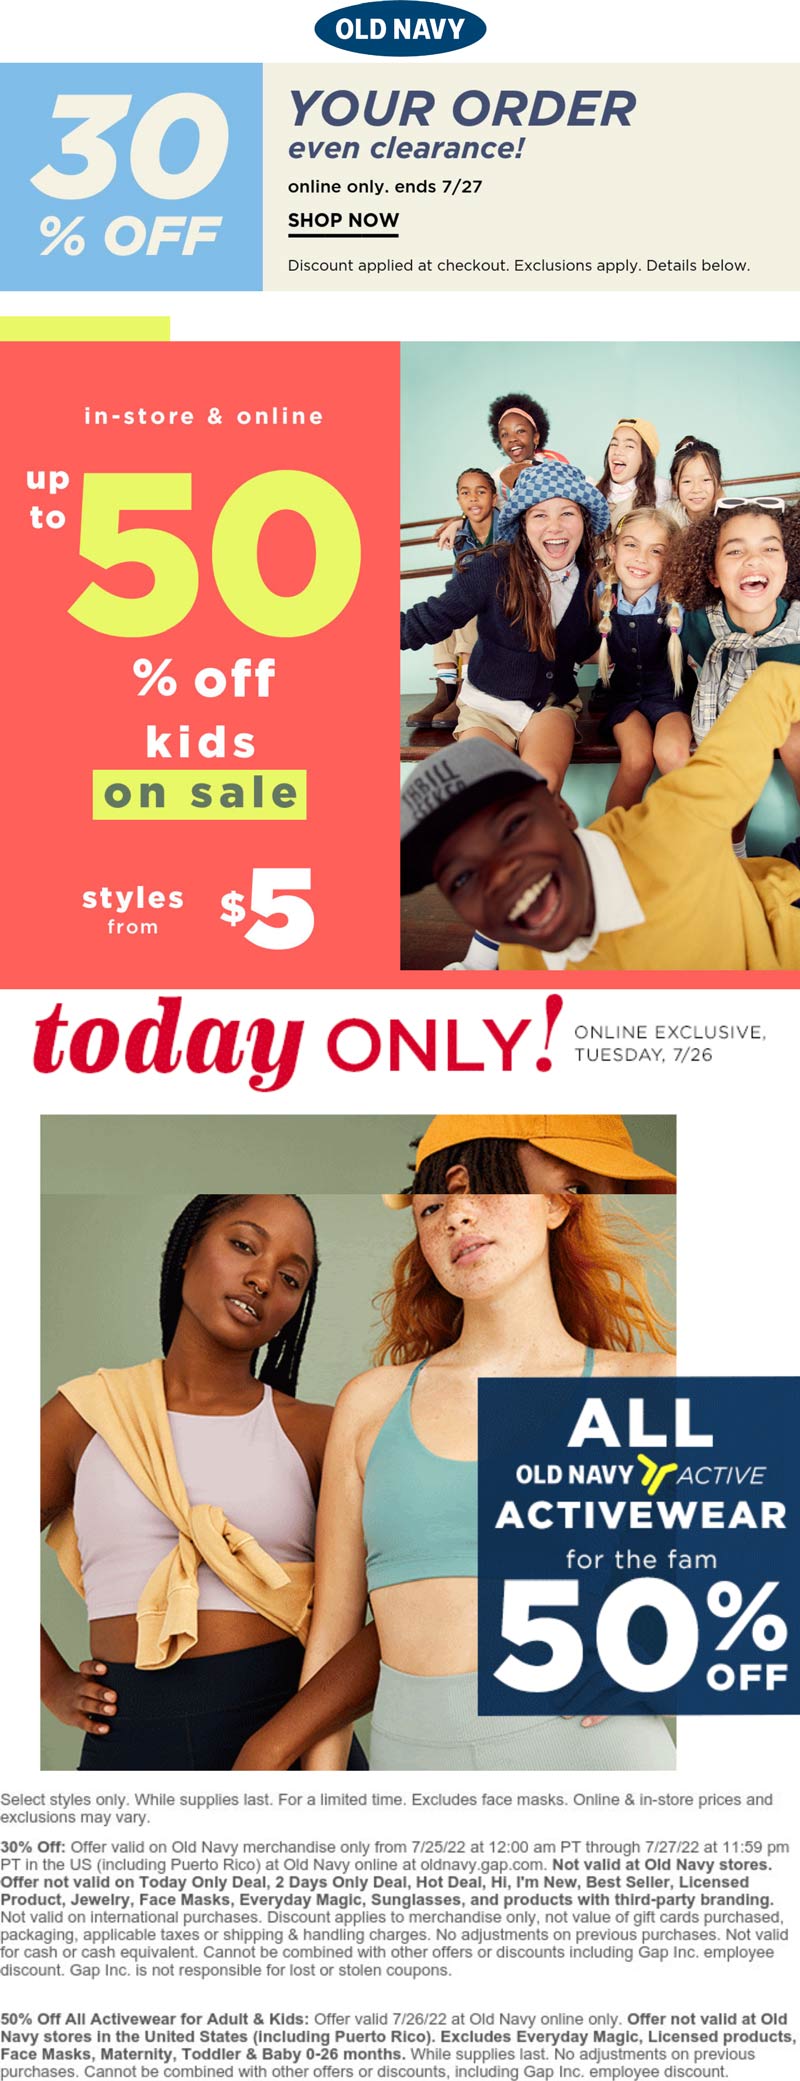 Old Navy stores Coupon  50% off activewear & 30% off online at Old Navy #oldnavy 